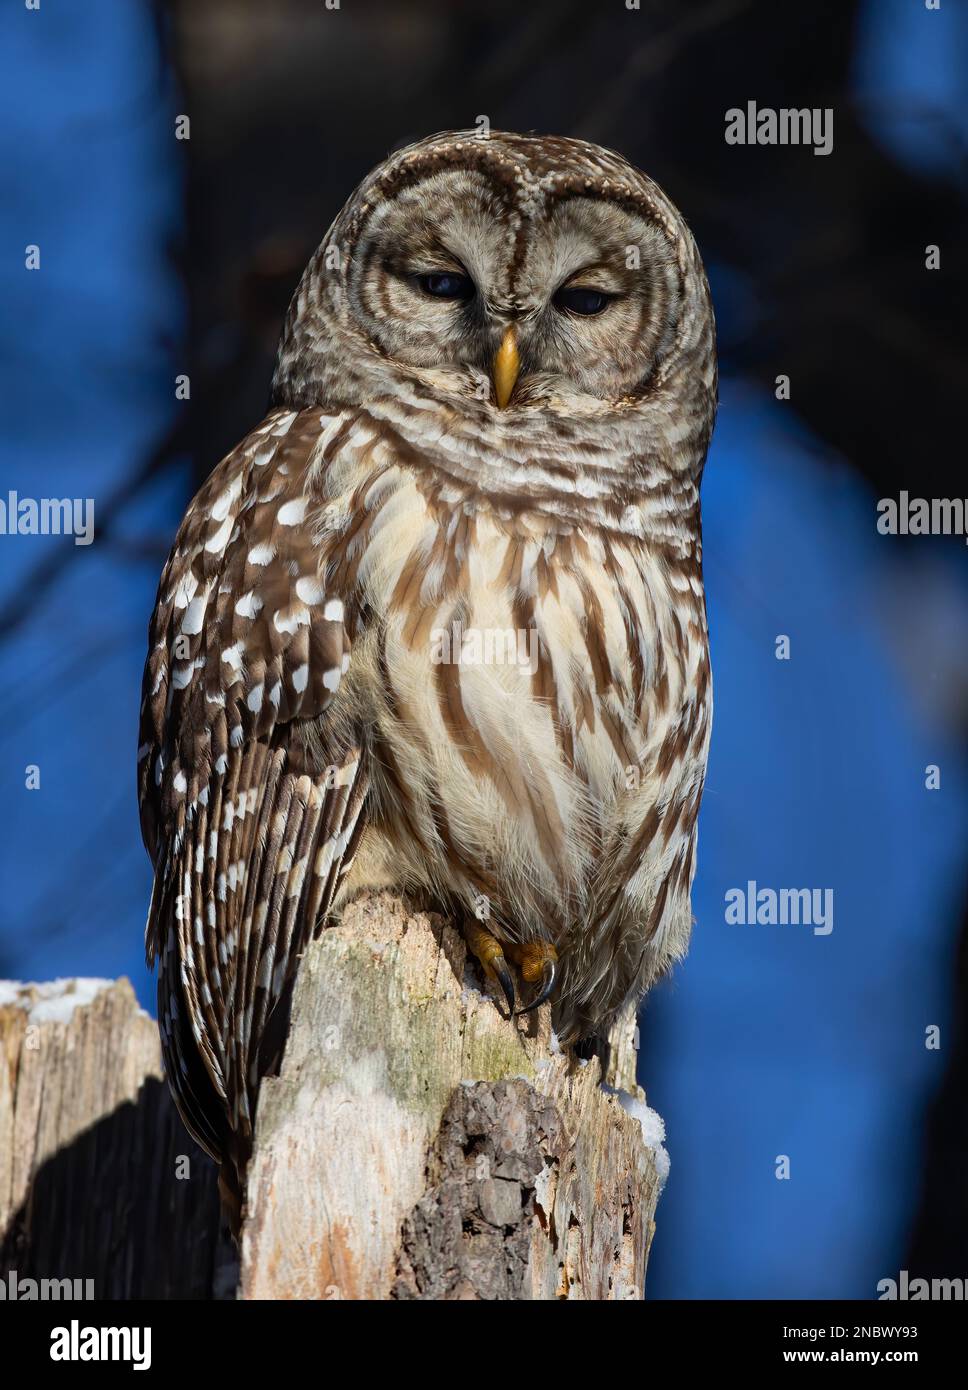 Barred owl (Strix varia) perched on an old tree stump in winter in Canada Stock Photo